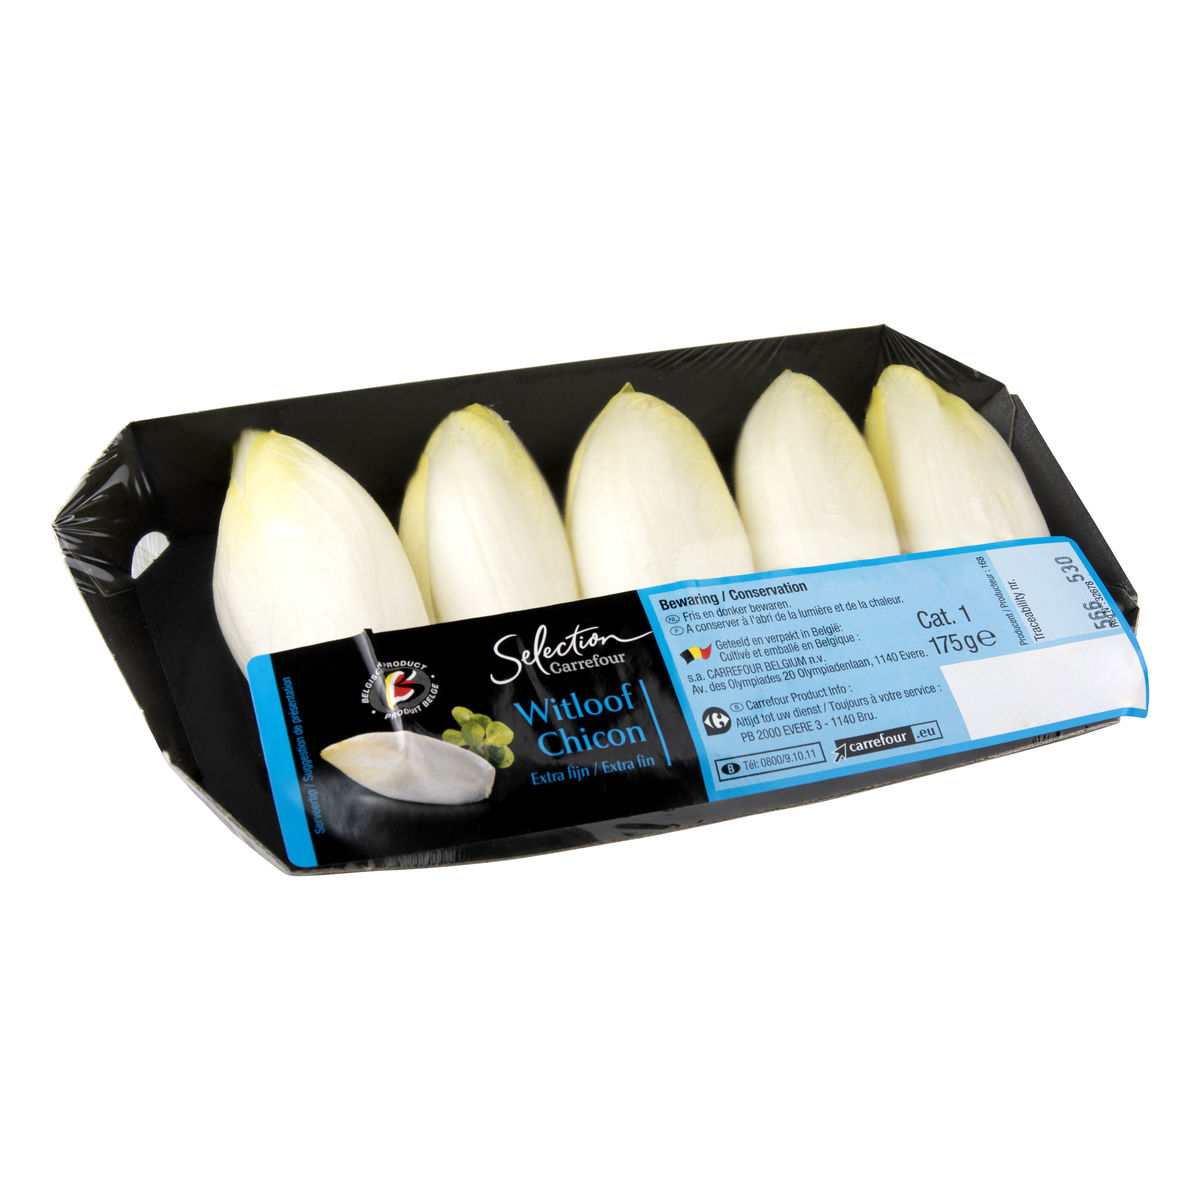 Carrefour Selection Chicons Extra Fin 175 g